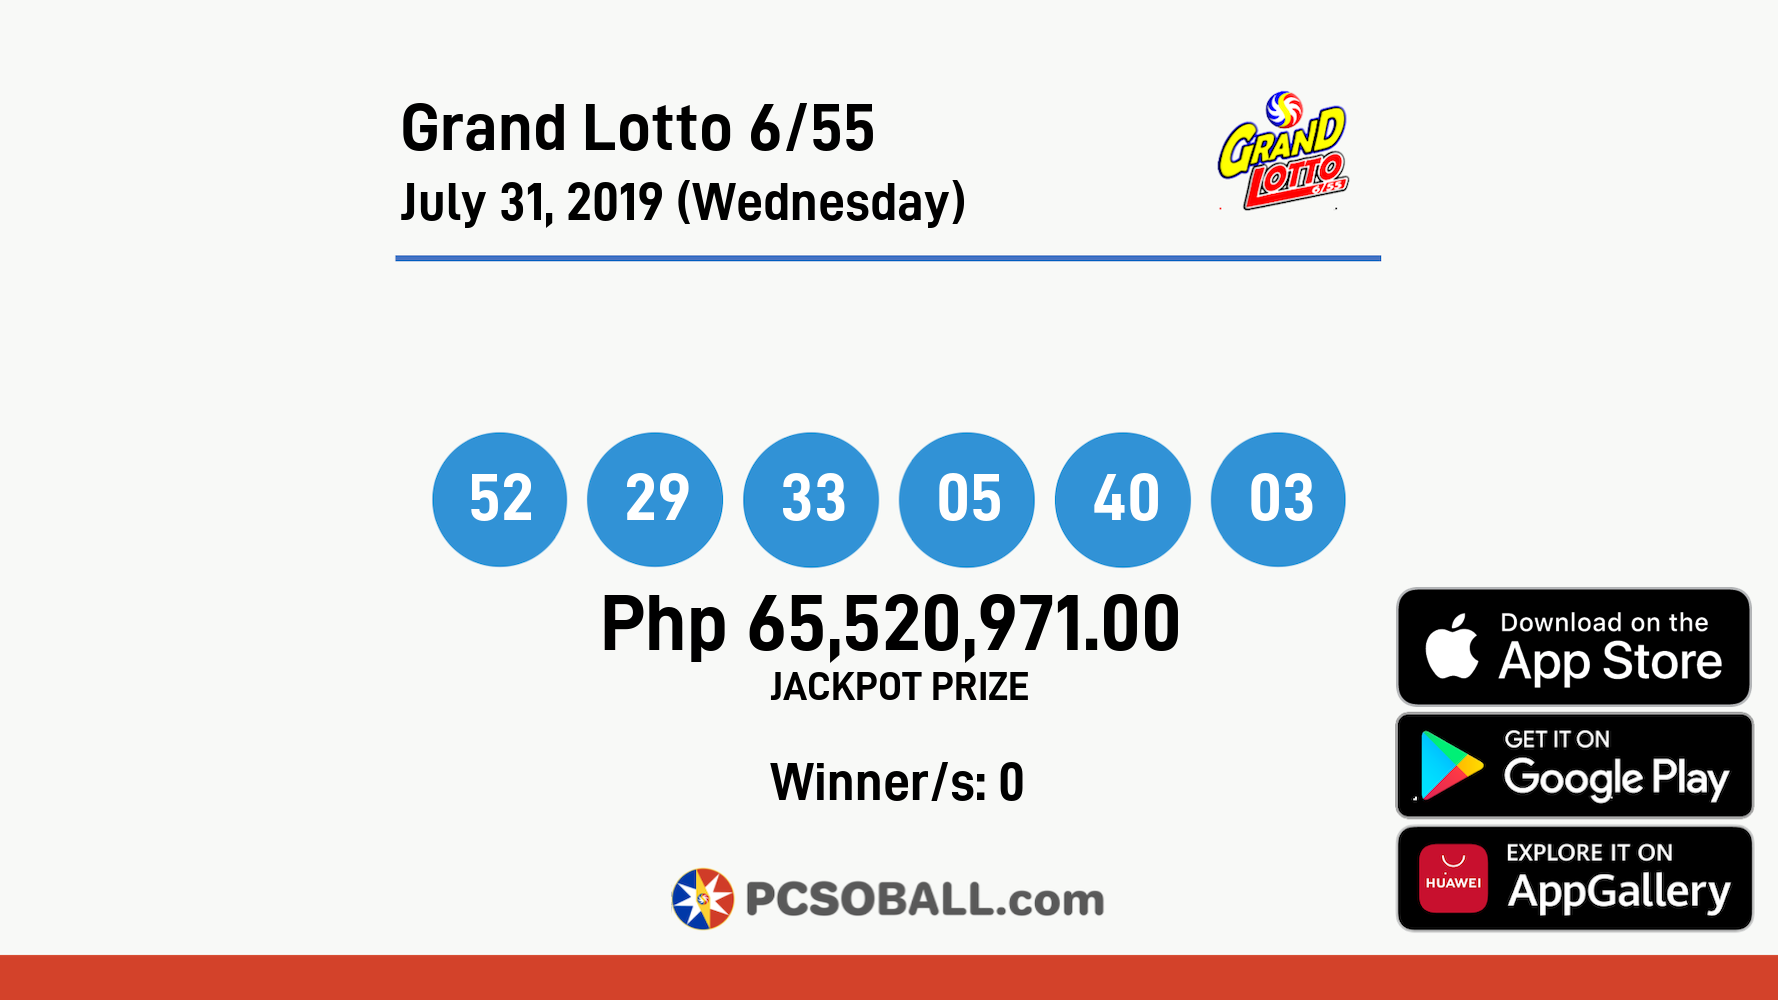 Grand Lotto 6/55 July 31, 2019 (Wednesday) Result